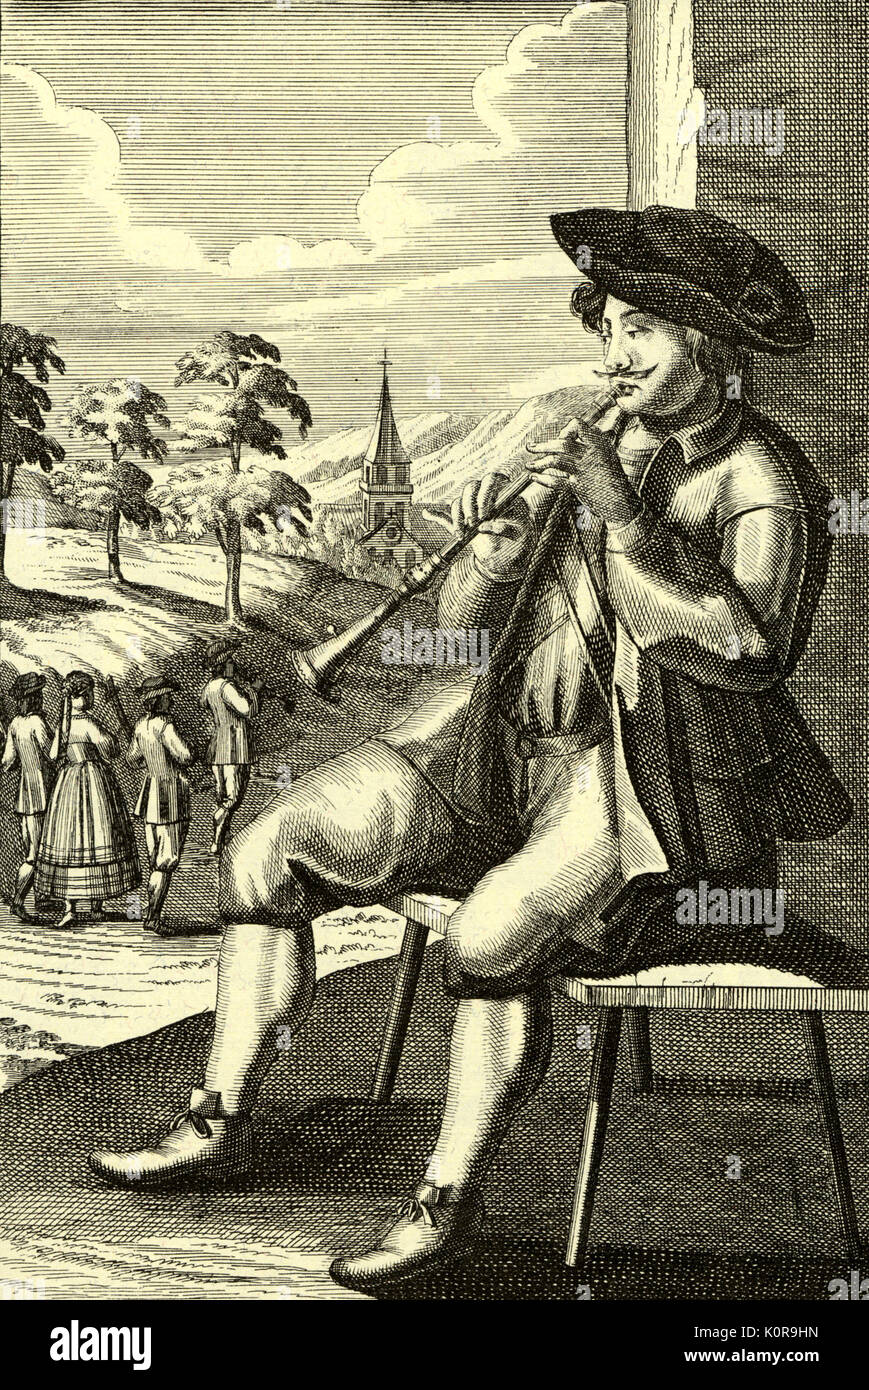 Early 18th century engraving of man with shawm. Engraving by J C Weigel (1661-1726). Early woodwind instrument, forerunner of oboe. Stock Photo